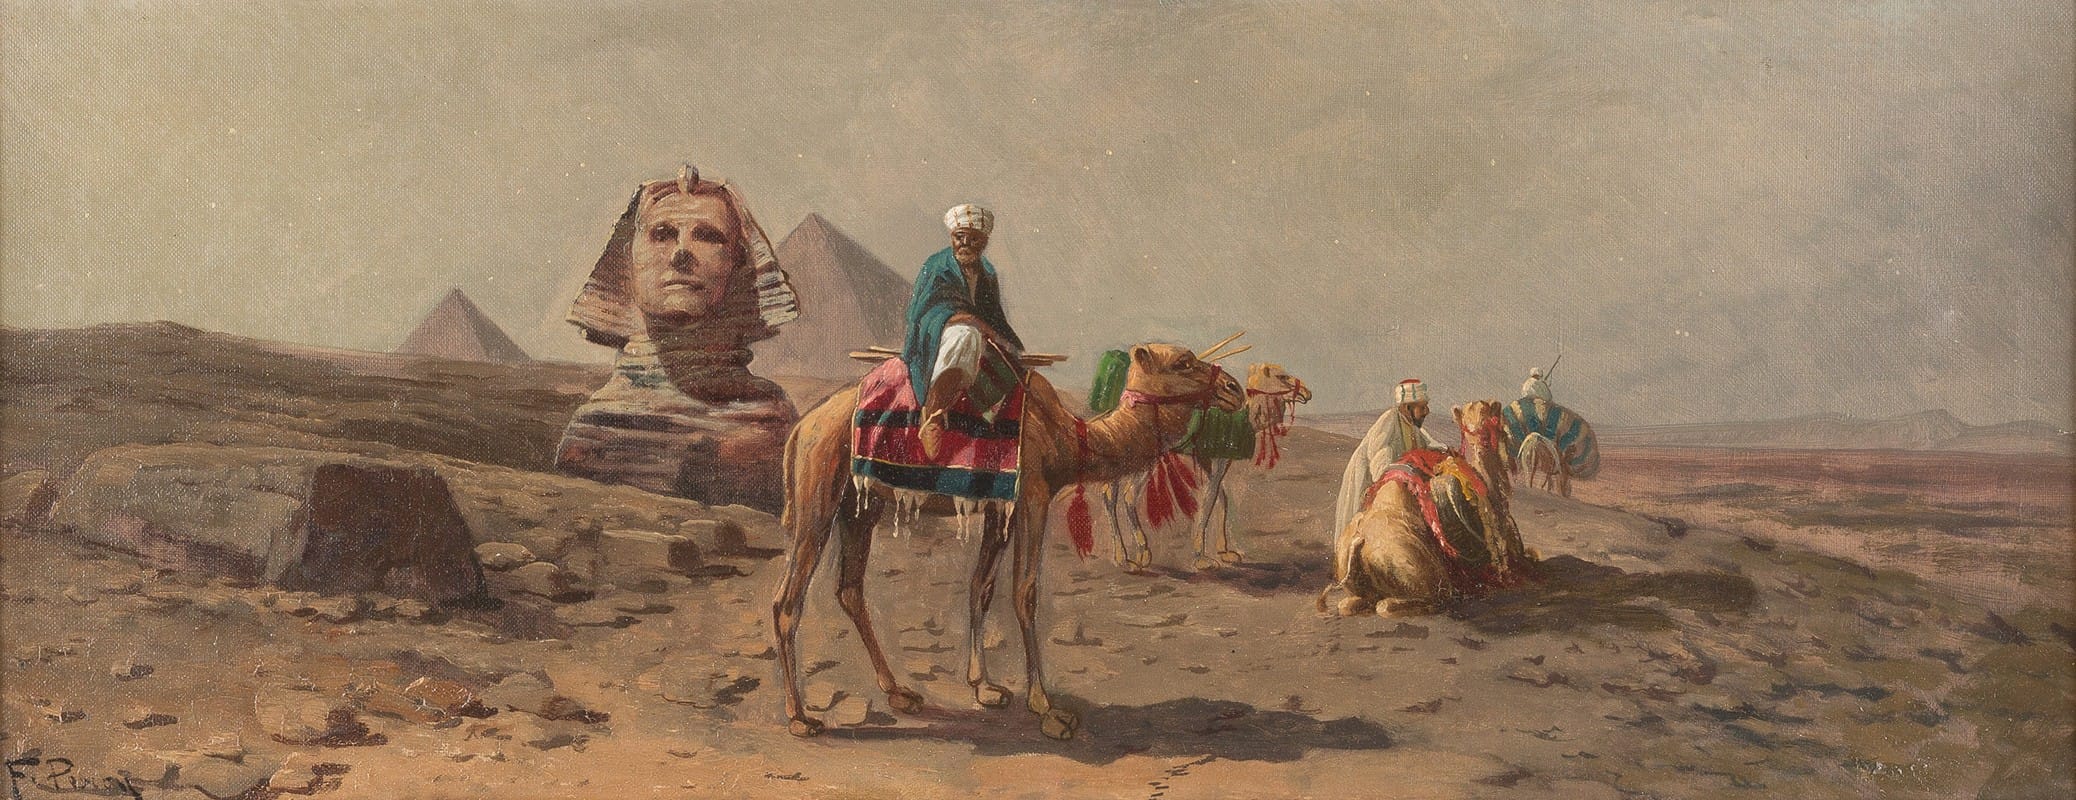 F. PERCY - Nocturnal rest at the pyramids of Gizeh